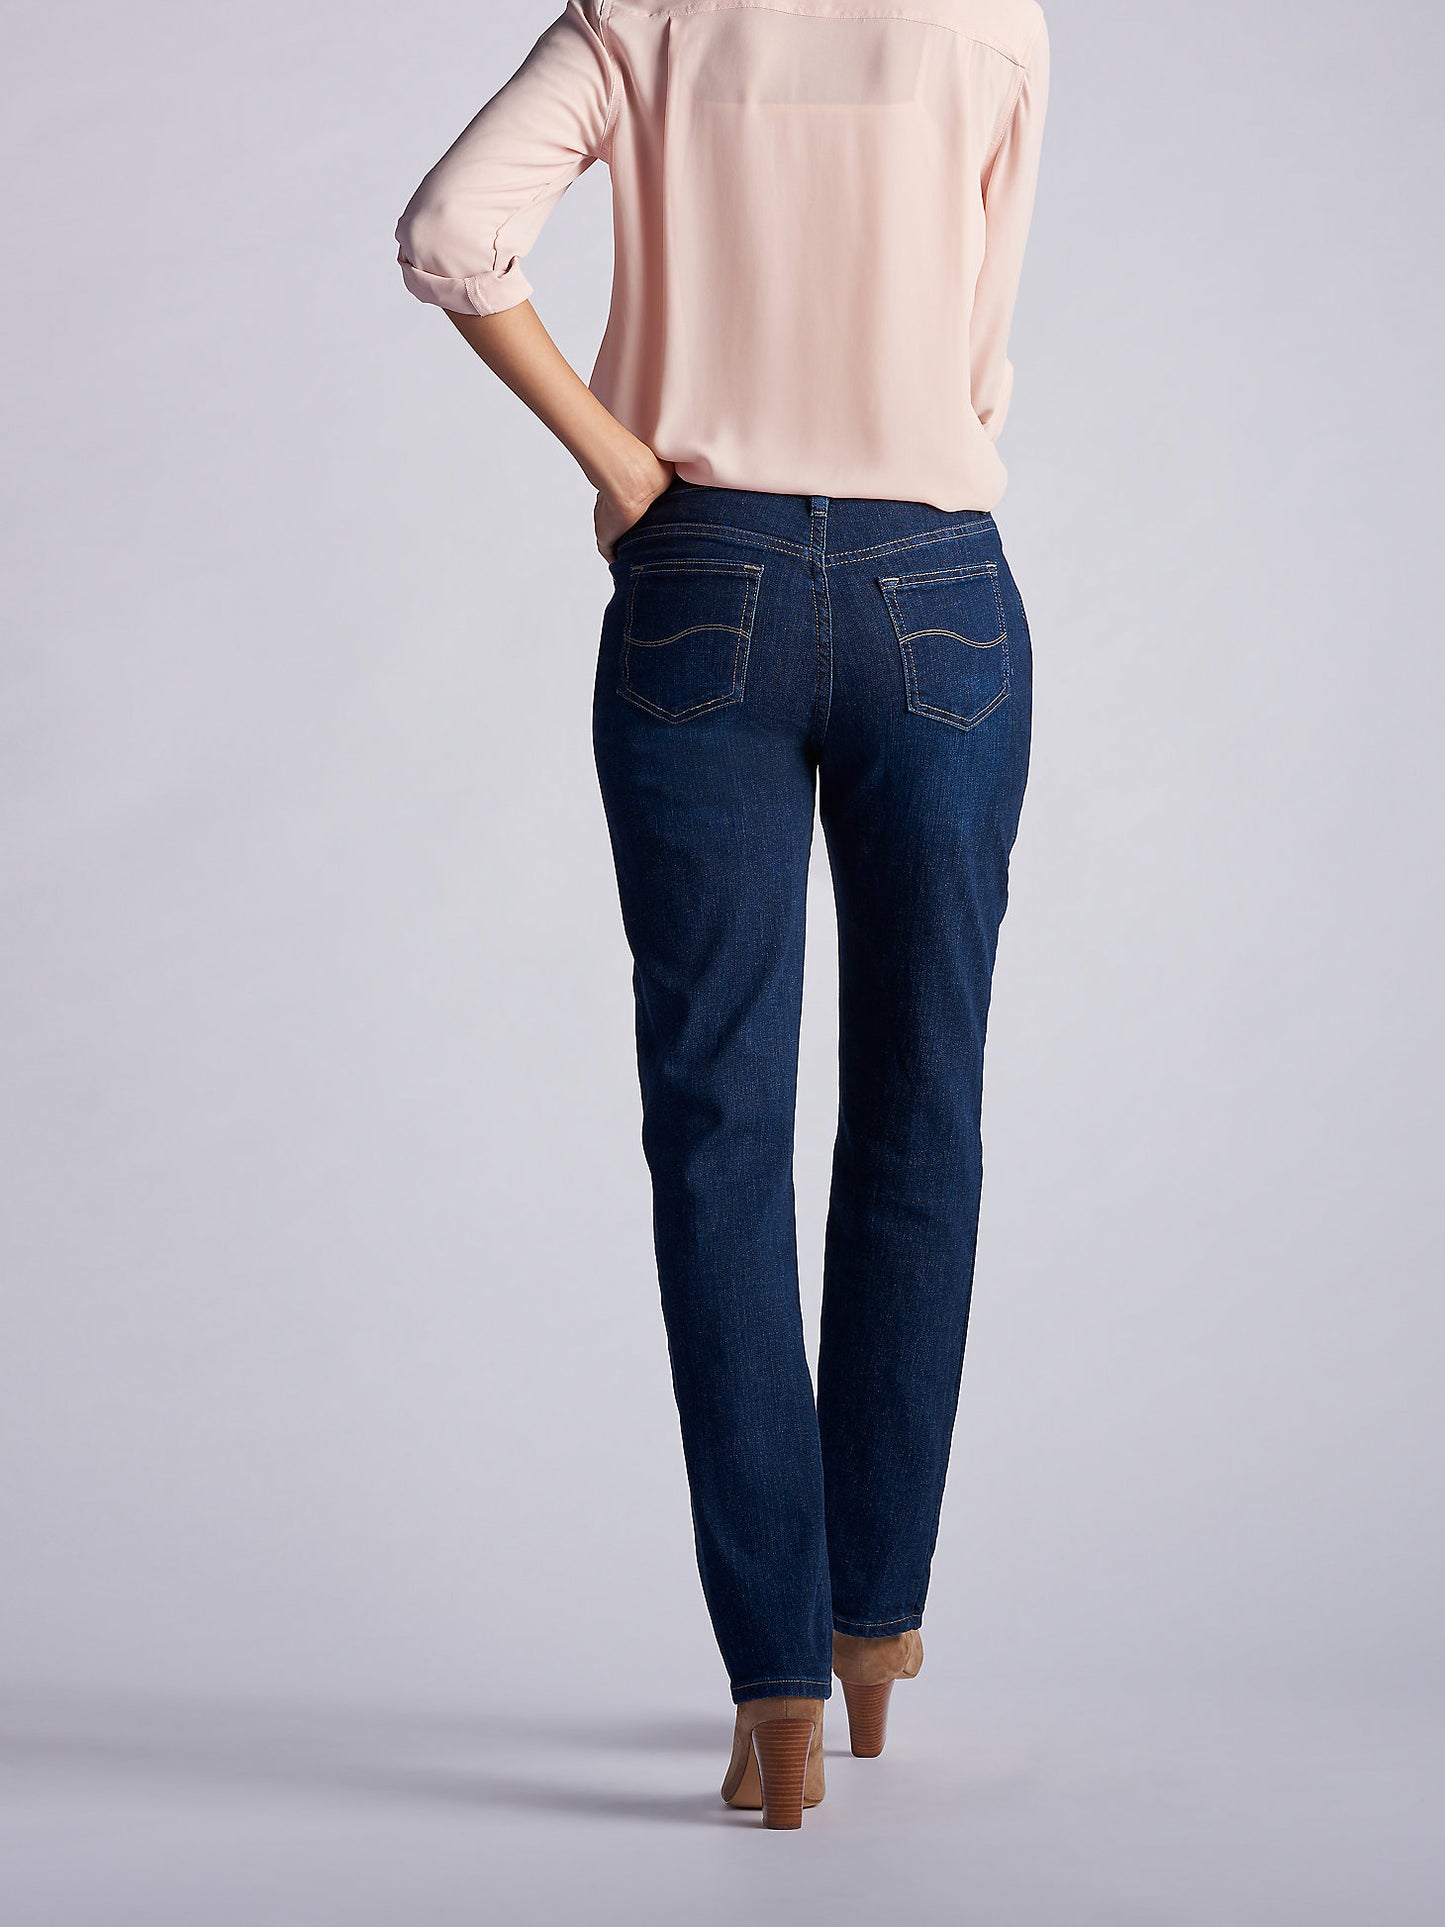 Women's Lee Relaxed Fit Straight Leg Jean